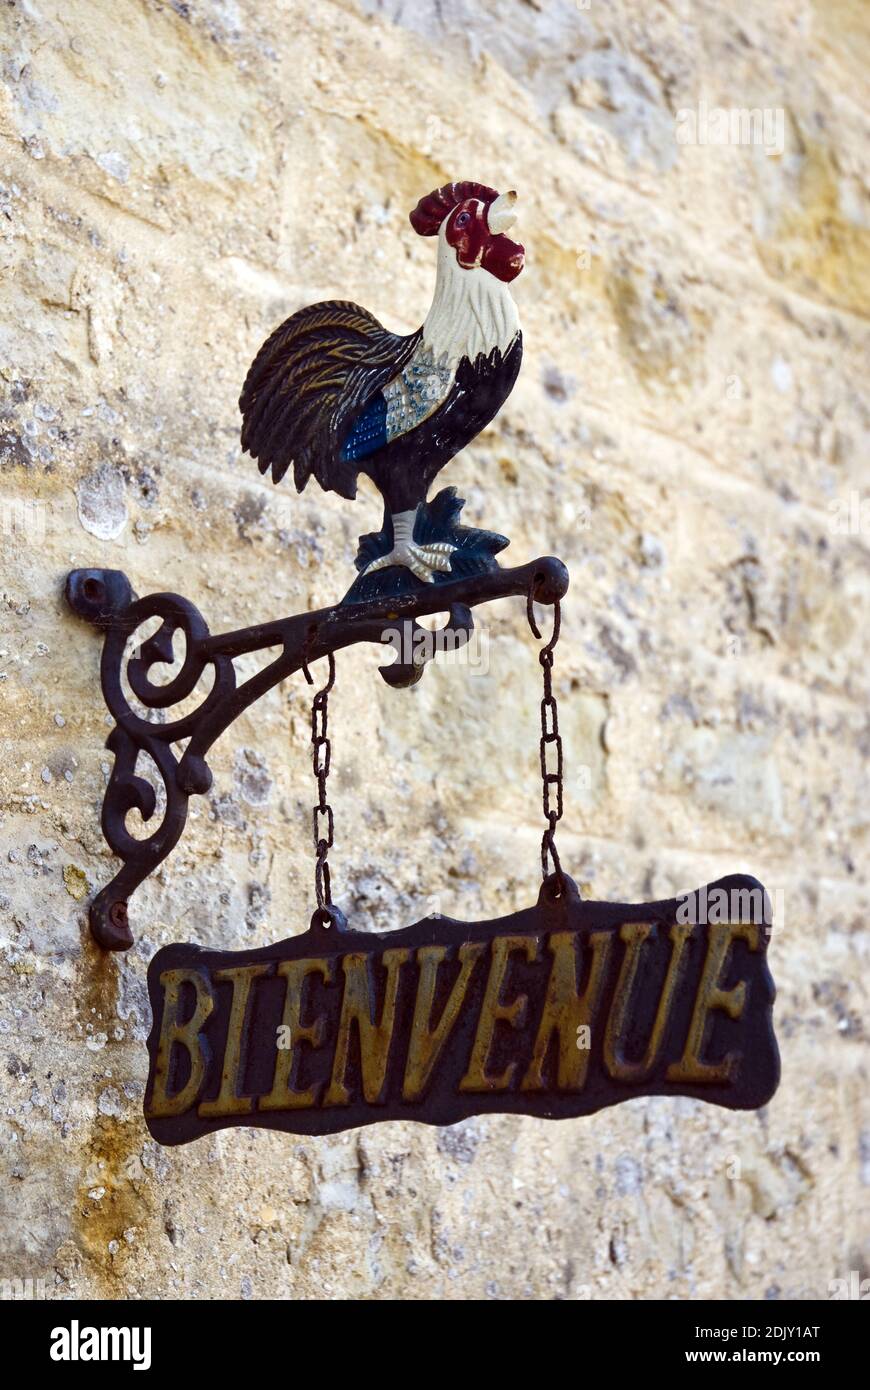 An iron rooster 'Bienvenue' (Welcome) sign at a traditional Normandy farm chateau near Utah Beach at Sainte-Marie-du-Mont, France. Stock Photo